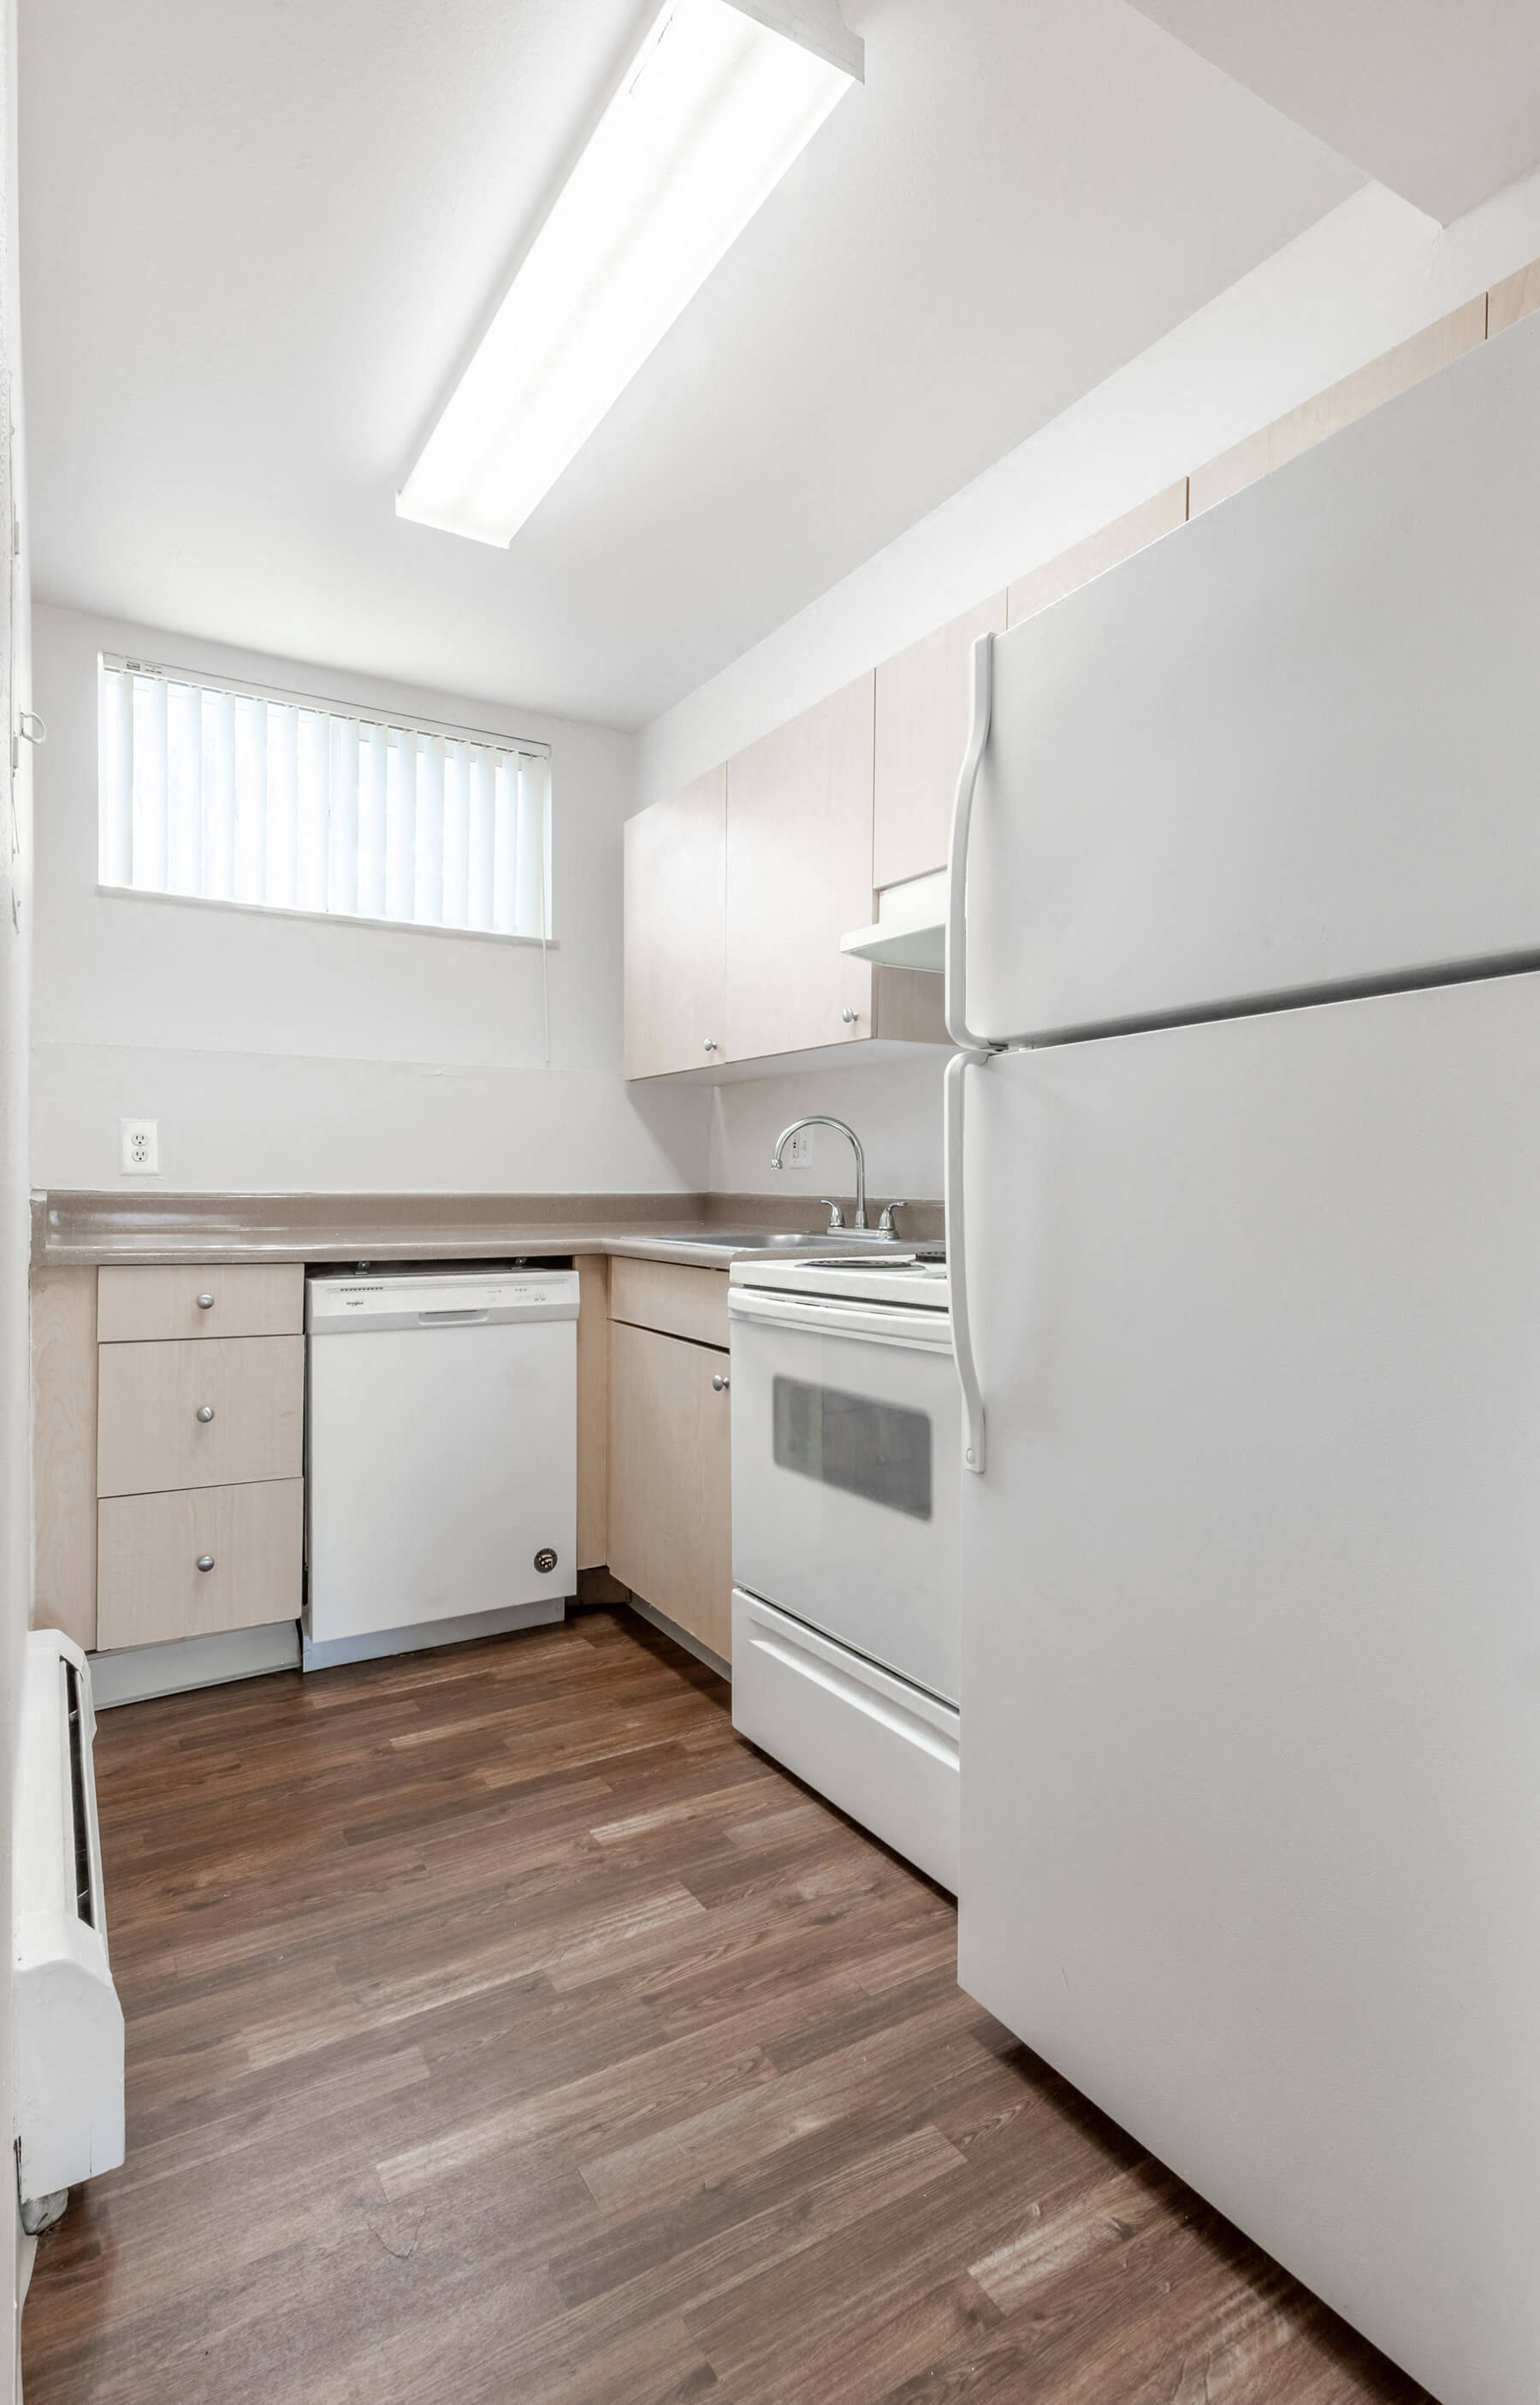 A bright, white kitchen at The Pines Apartments in Denver, Colorado.